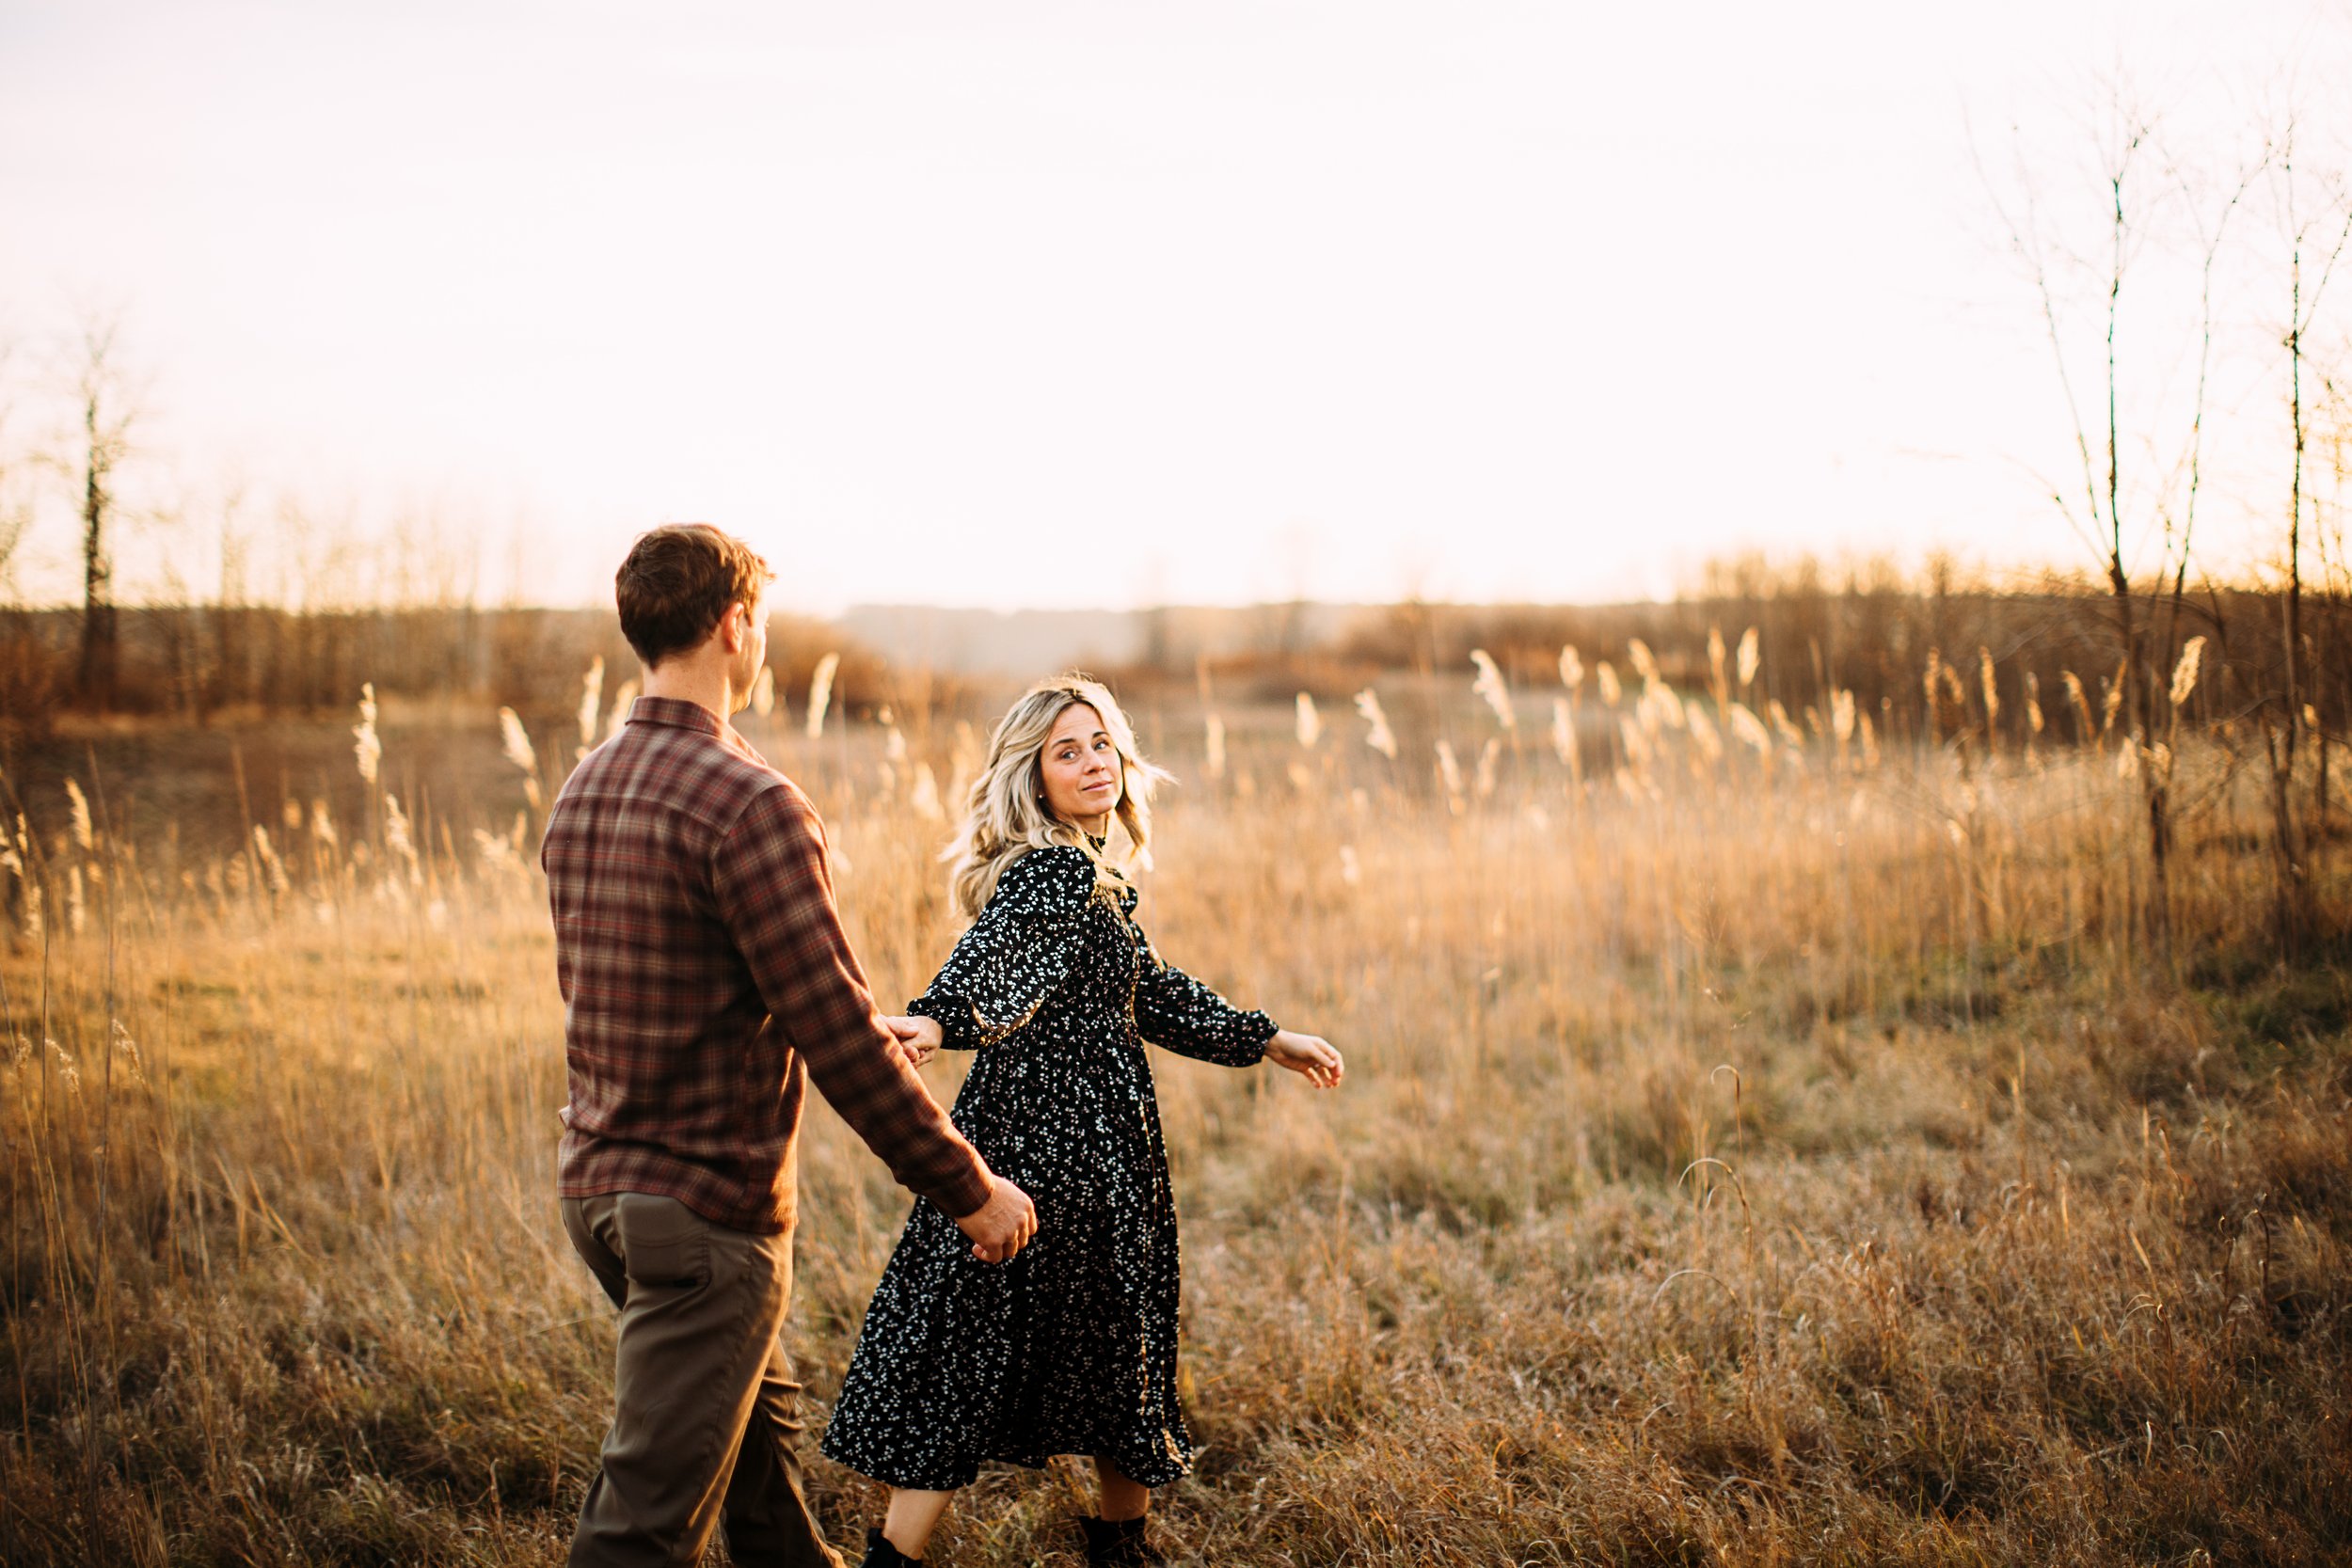  A married couple walks holding hands in a sunlit yellow grass field by Teala Ward Photography. Utica family photog warm rich edit #TealaWardPhotography #TealaWardFamilies #StarvedRockStatePark #BuffaloRockPhotographers #UticaIllinoisphotographers 